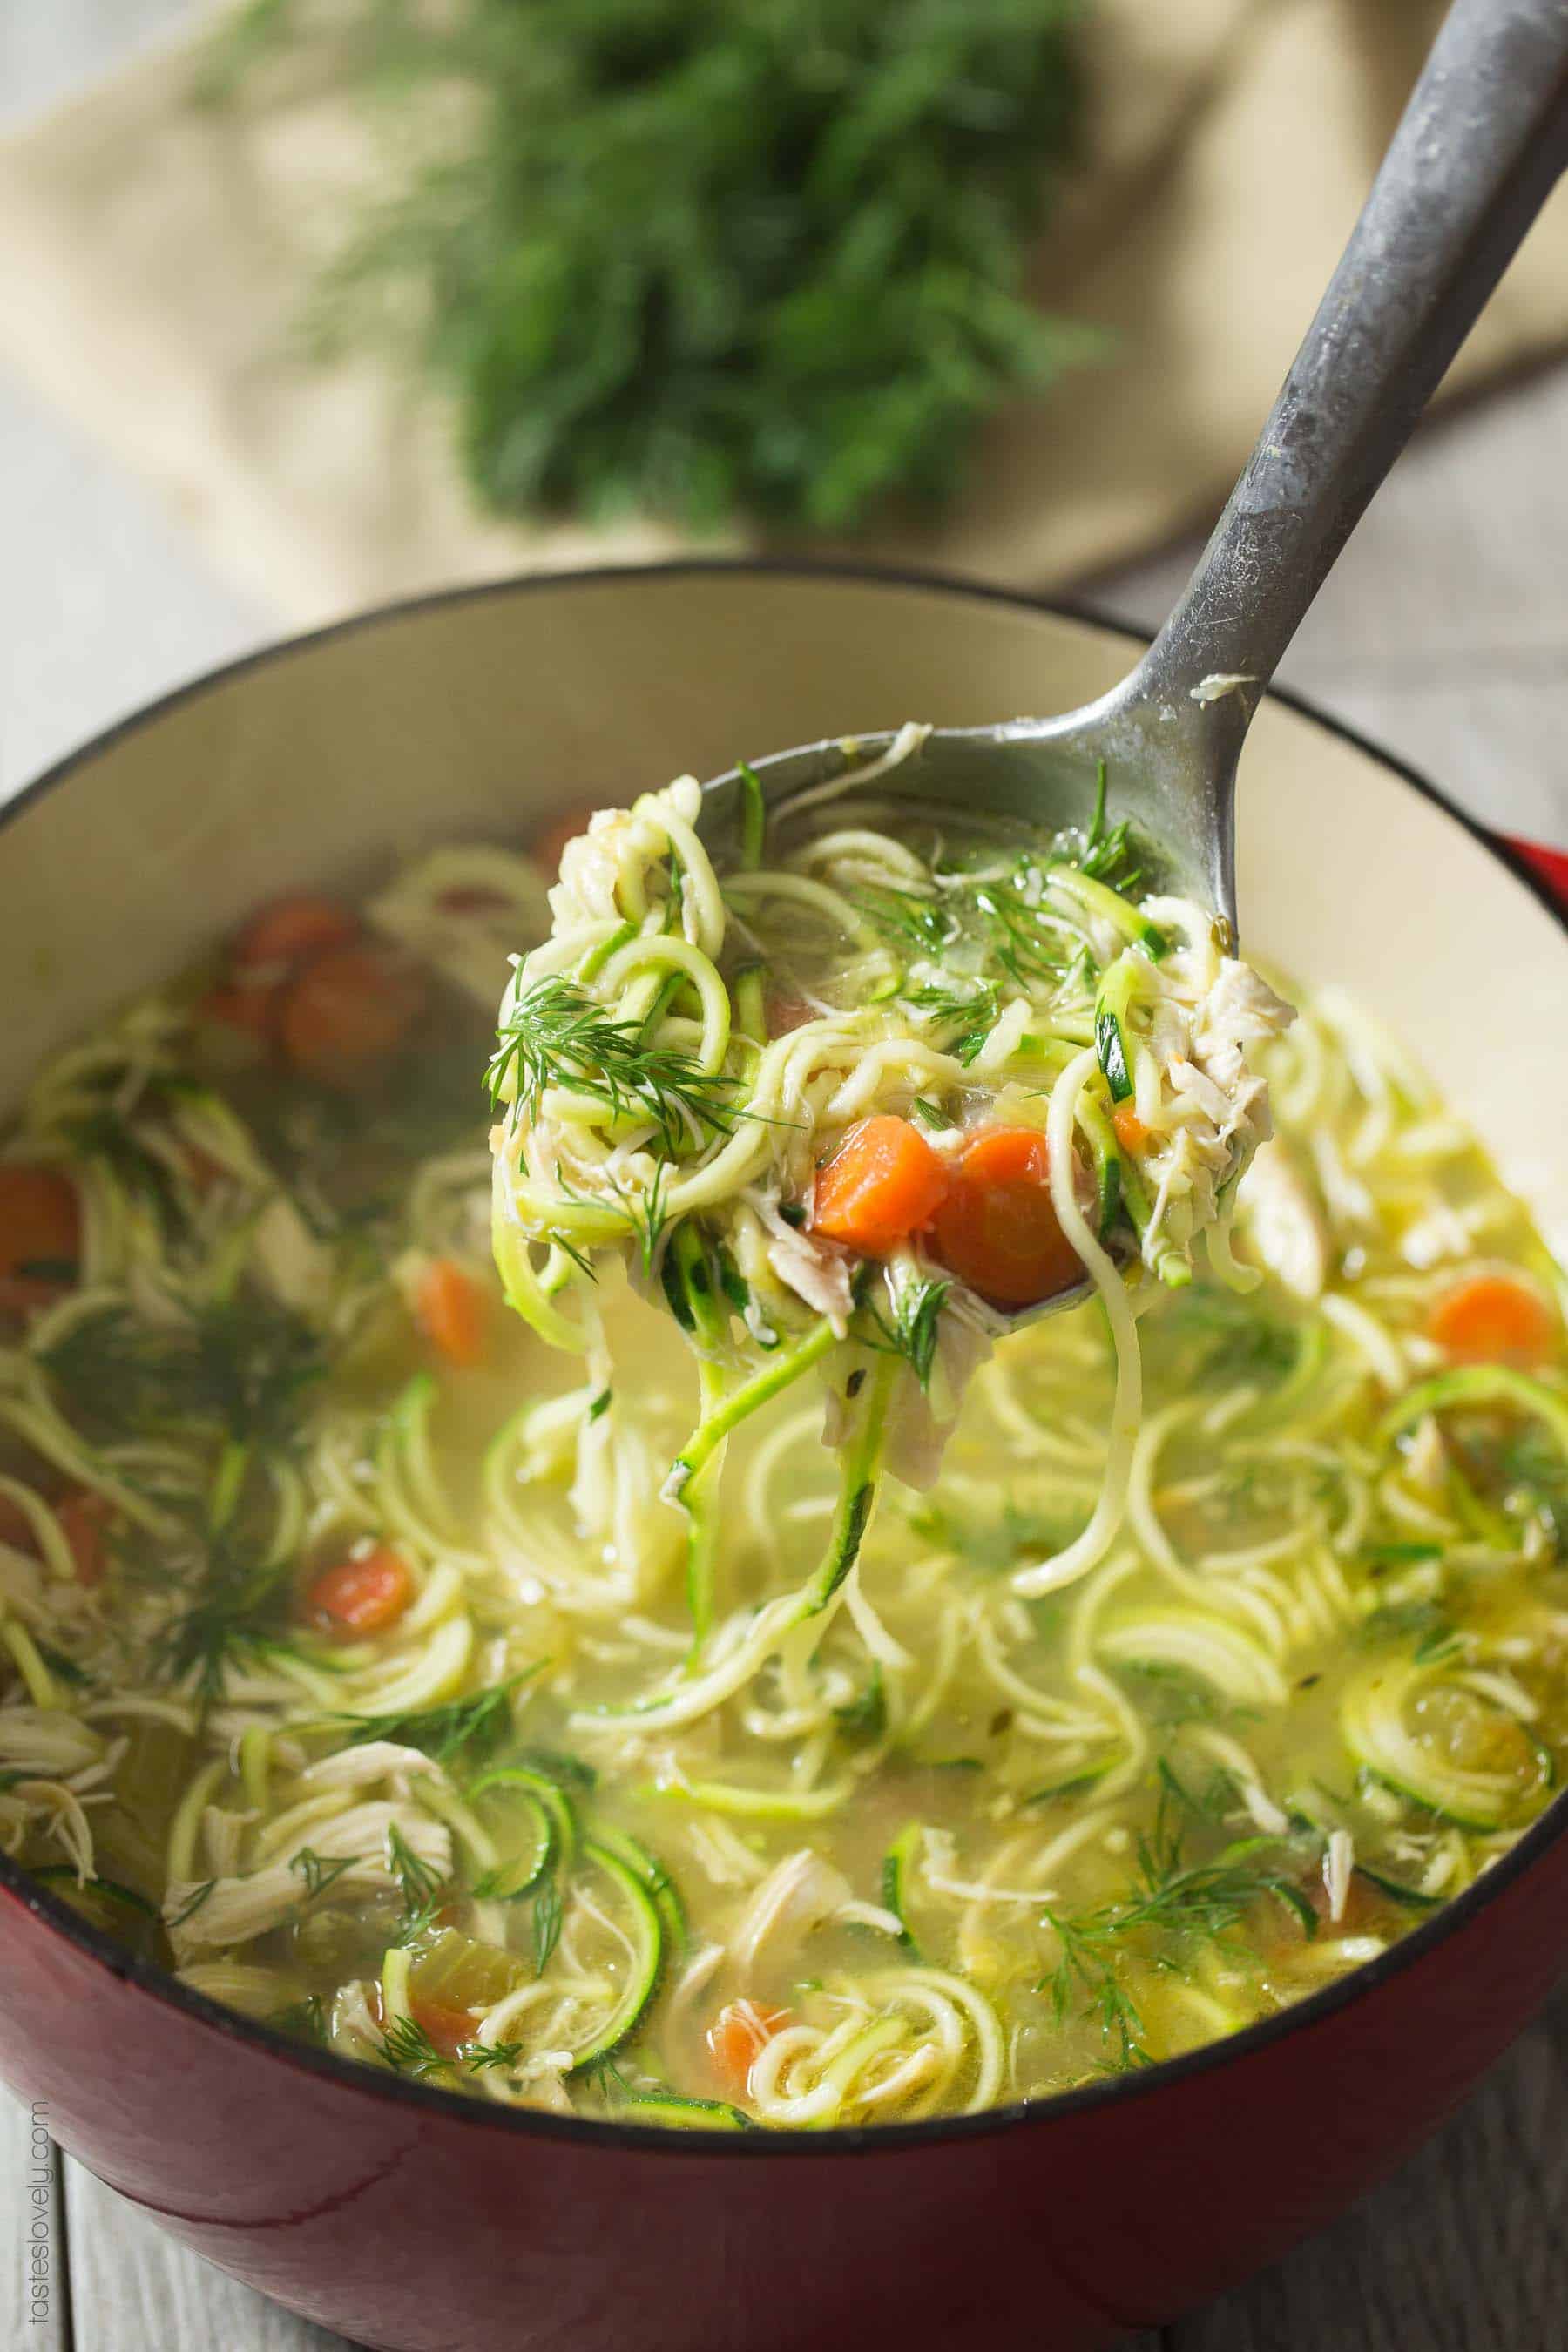 Chicken Zoodle Soup with Dill - comforting and healing recipe with the most amazing broth! (Paleo, Whole30, dairy free, gluten free, grain free, low carb)